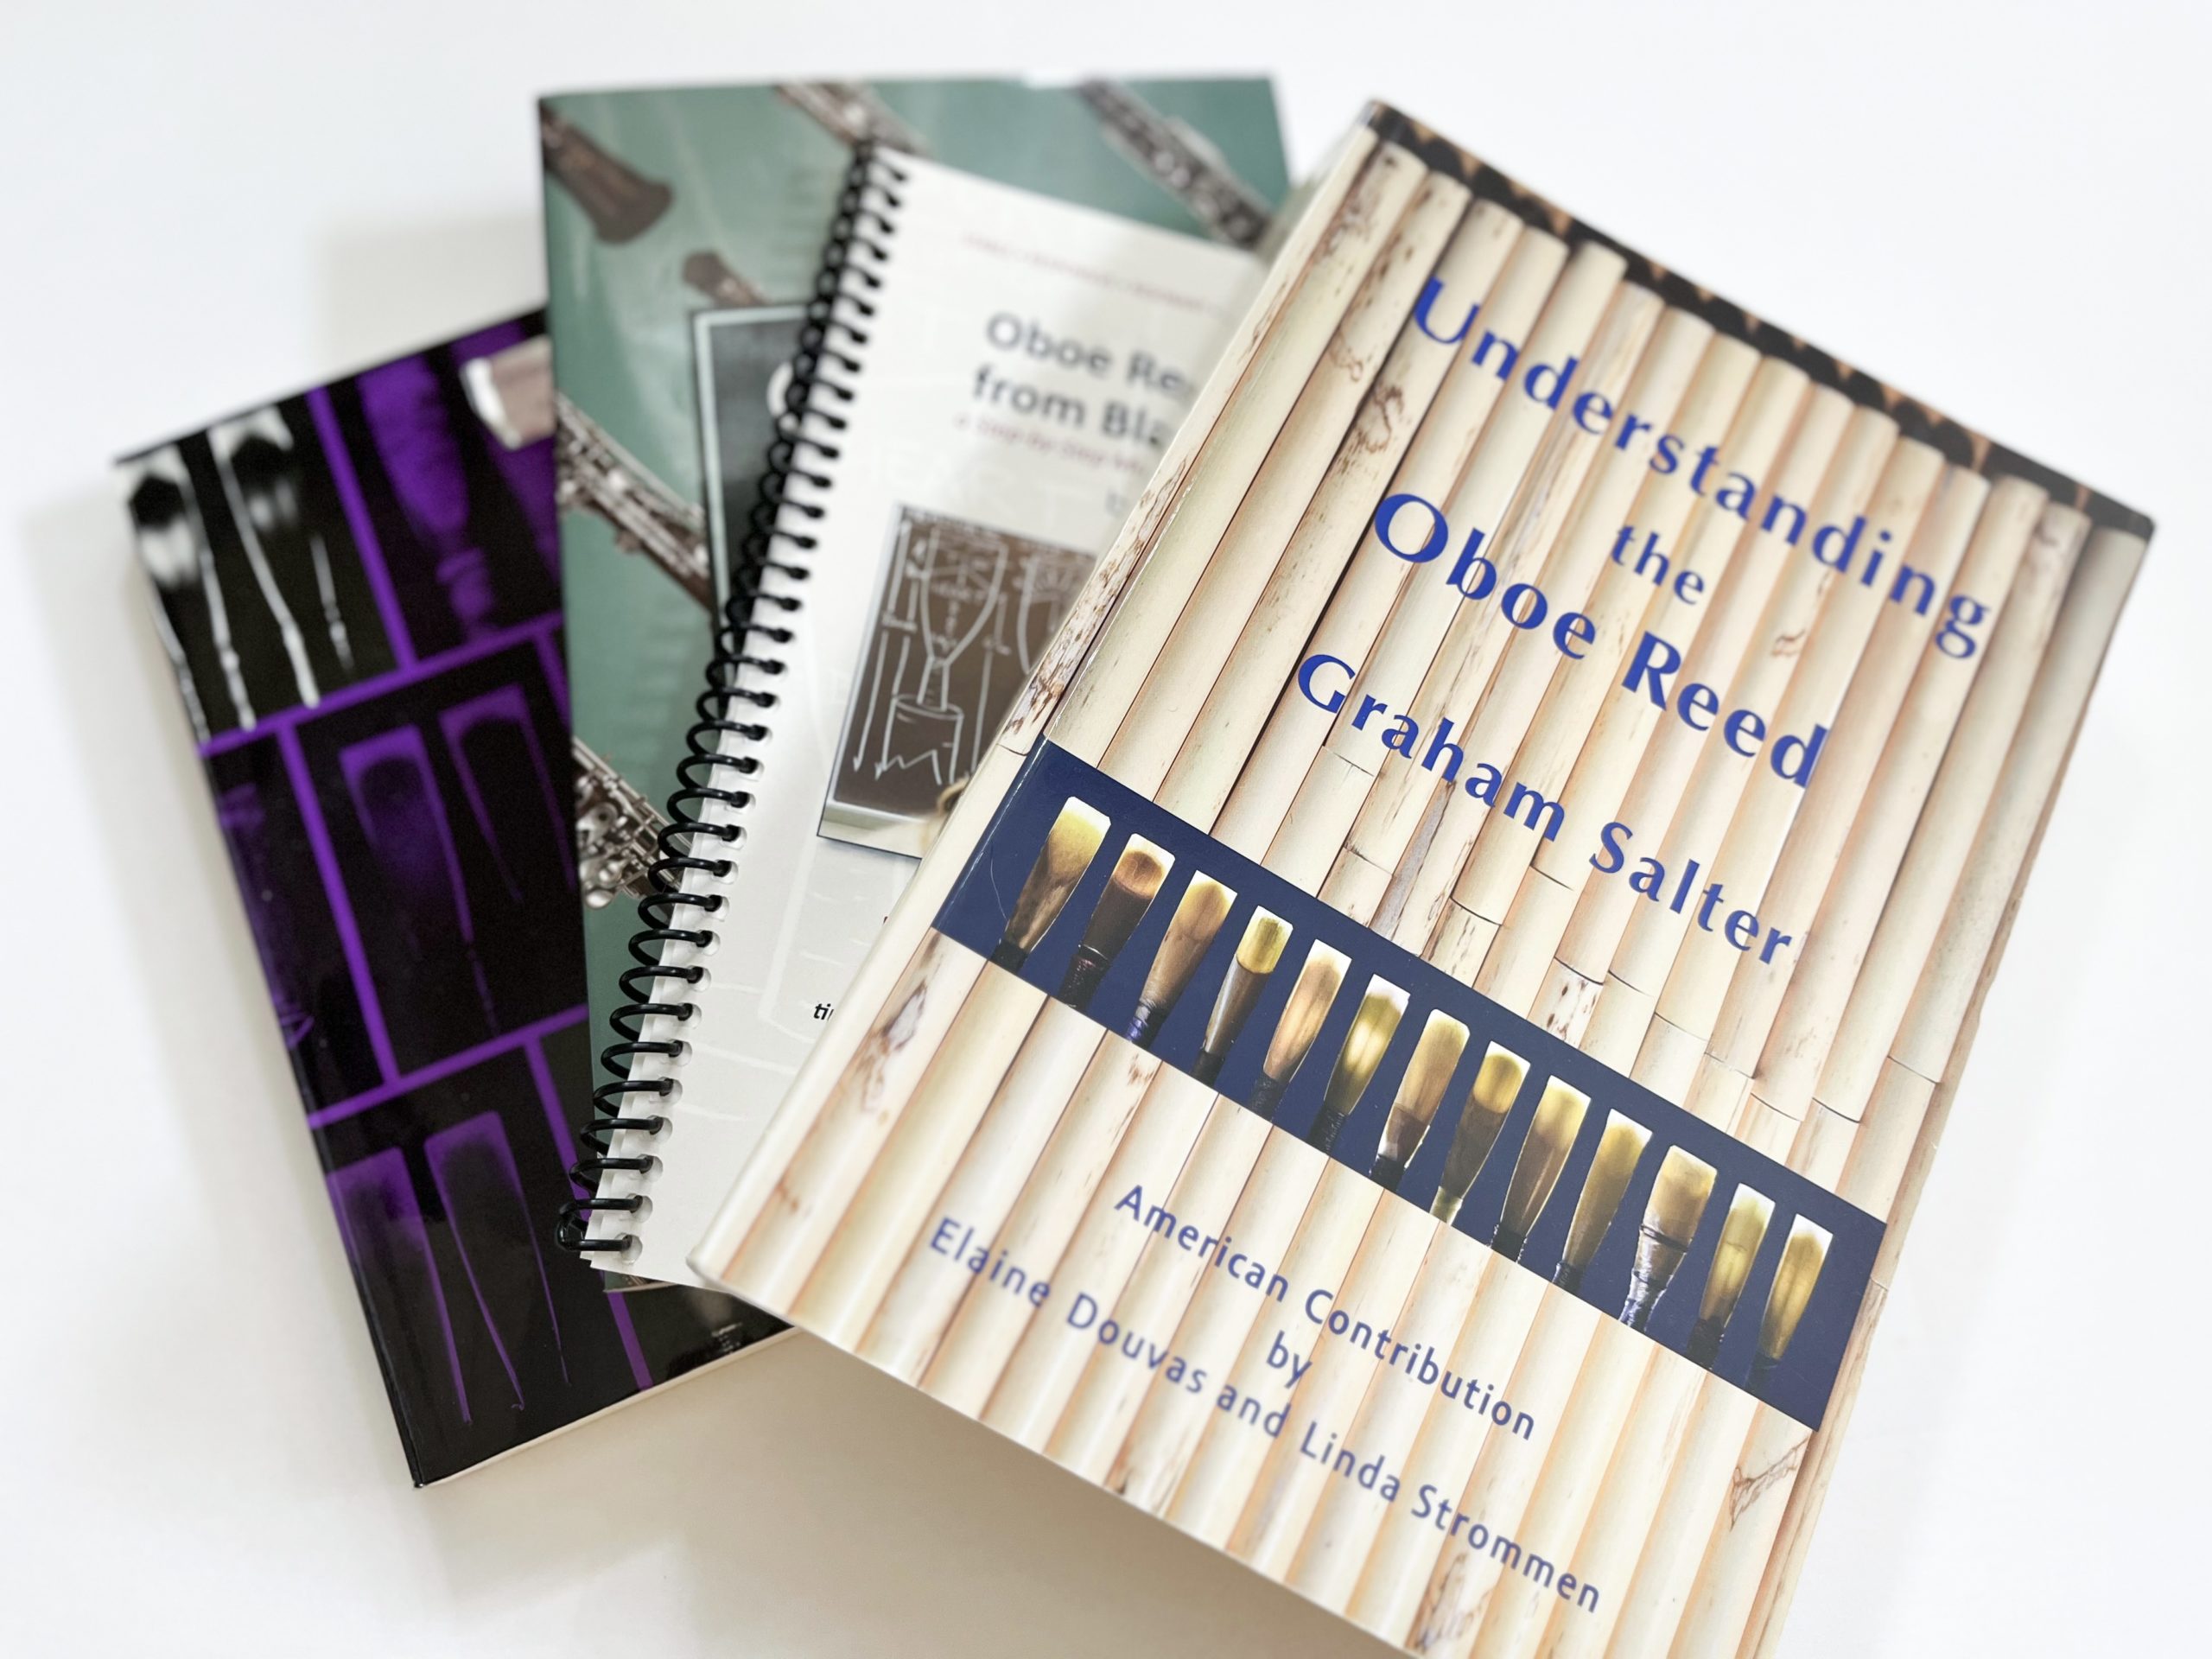 Oboe Reed Making Books: Reviewed